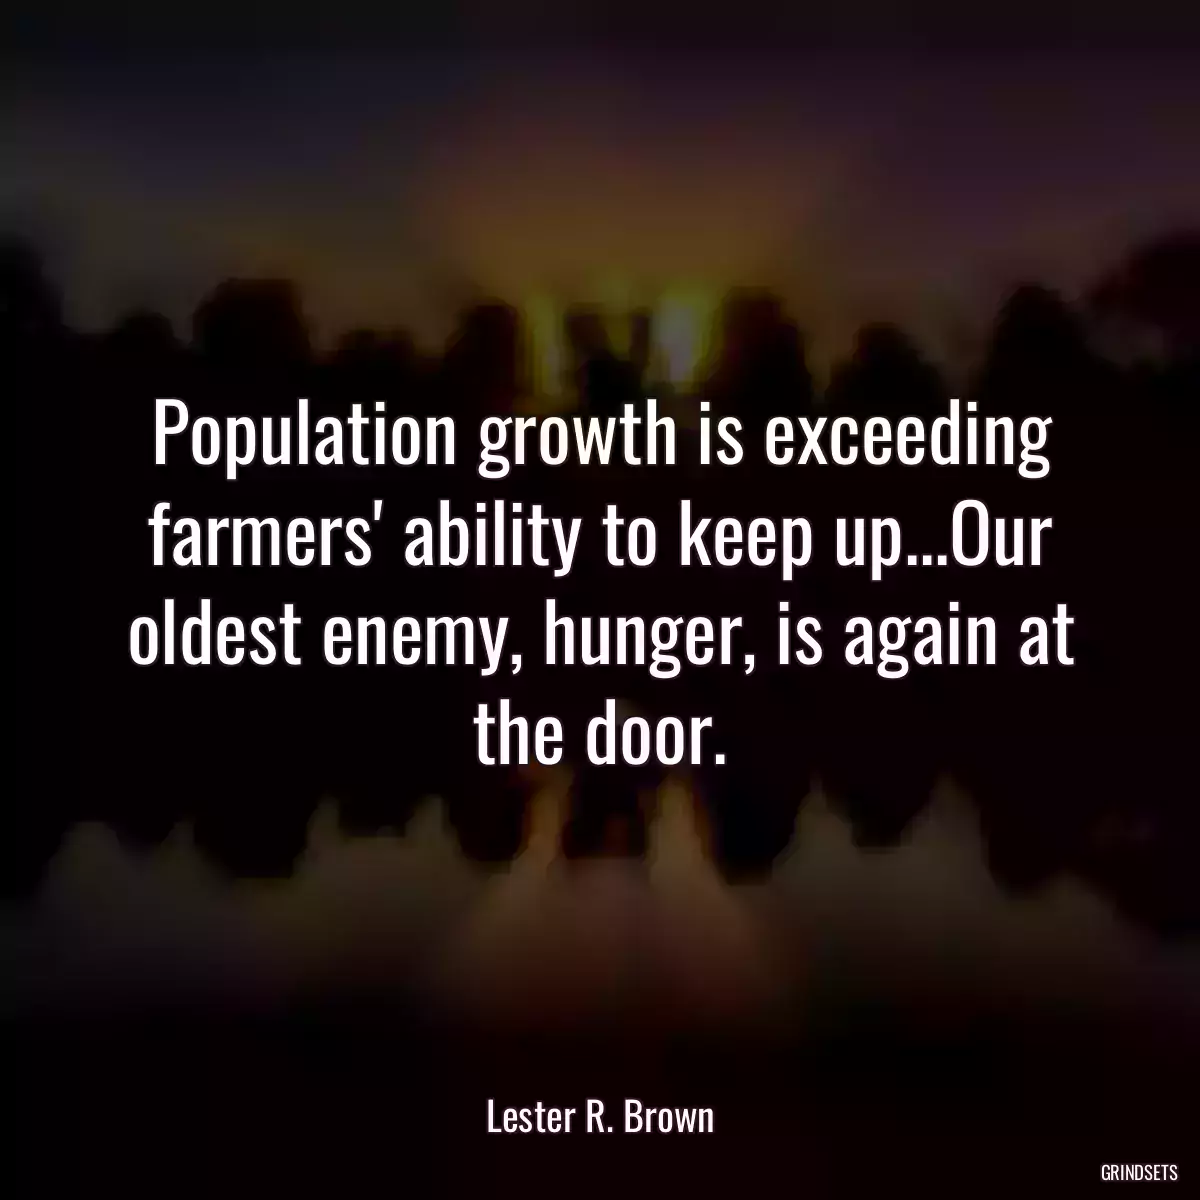 Population growth is exceeding farmers\' ability to keep up...Our oldest enemy, hunger, is again at the door.